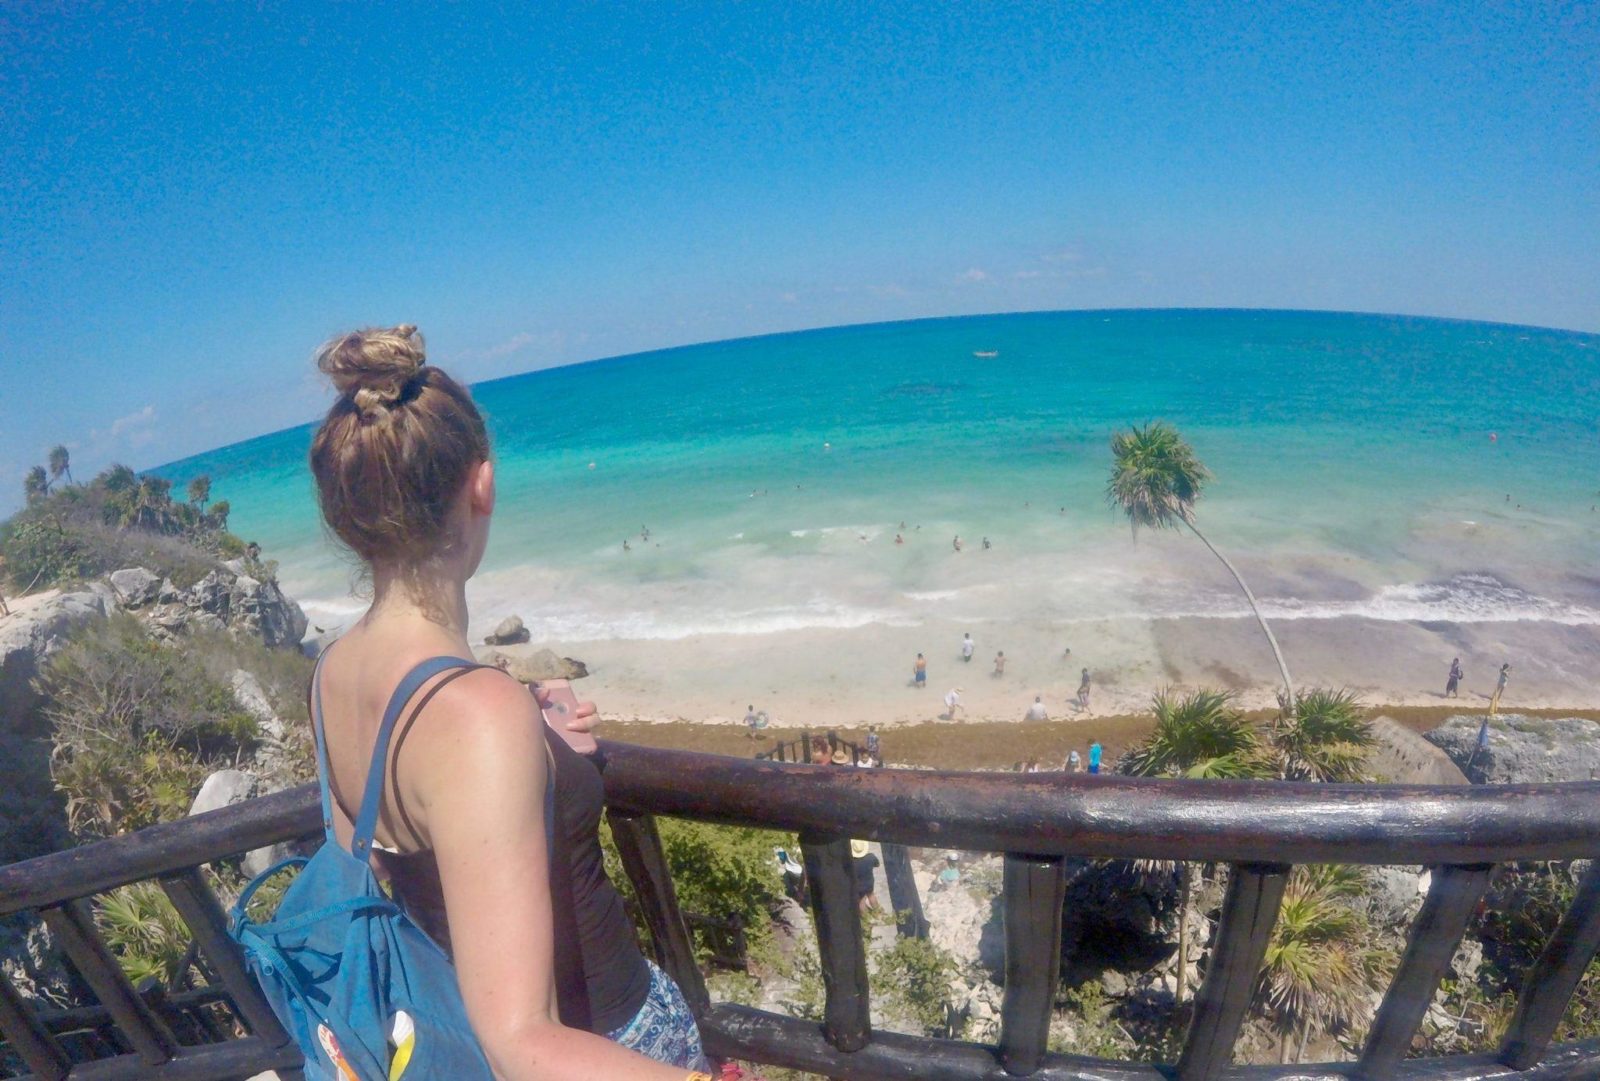 How to see the Mayan Ruins in Tulum Mexico